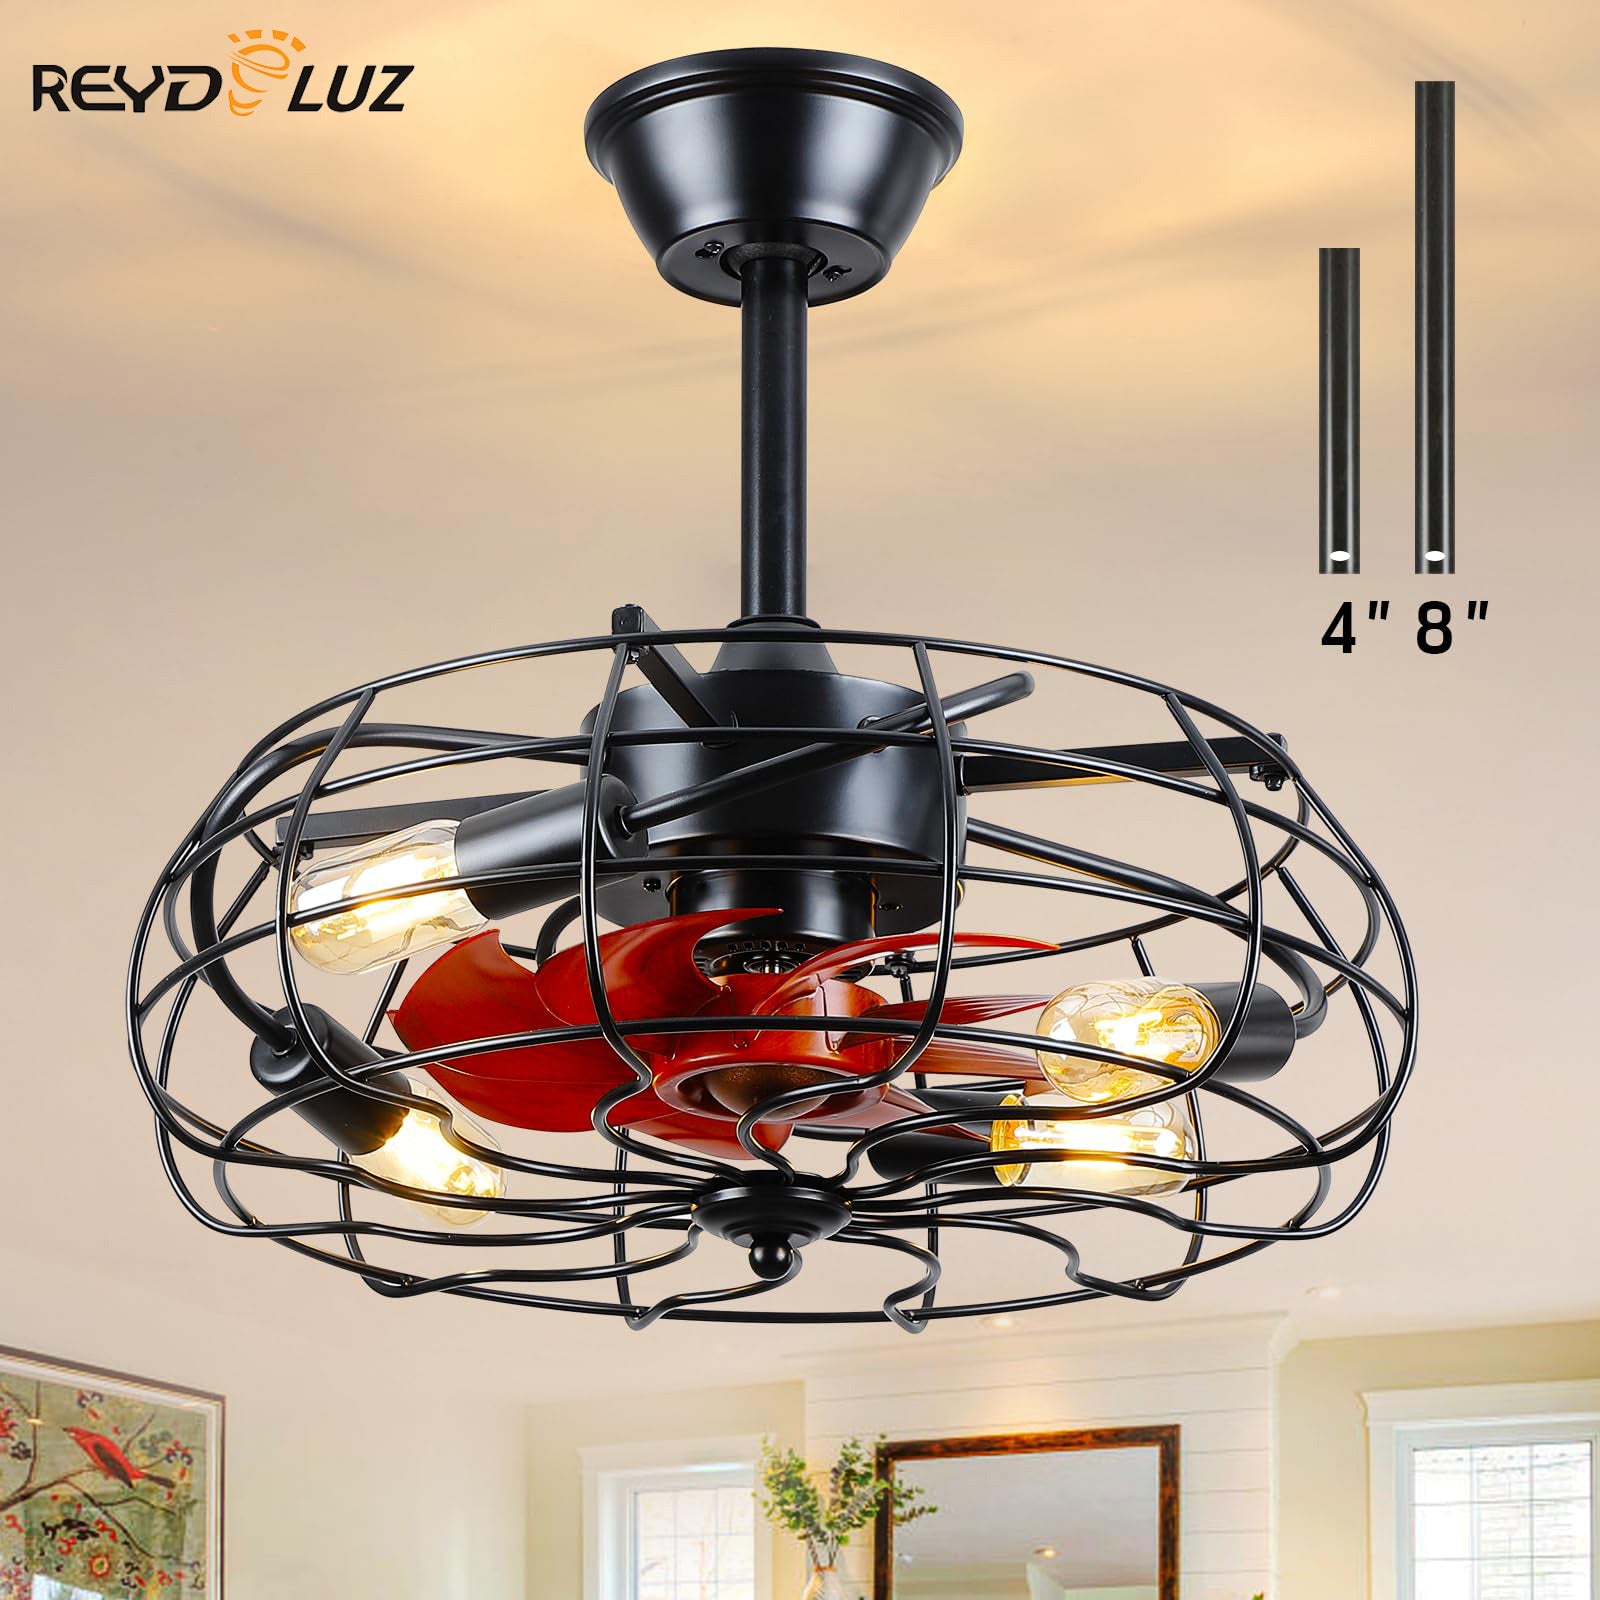 REYDELUZ 19" Caged Ceiling Fans with Lights Remote Control.